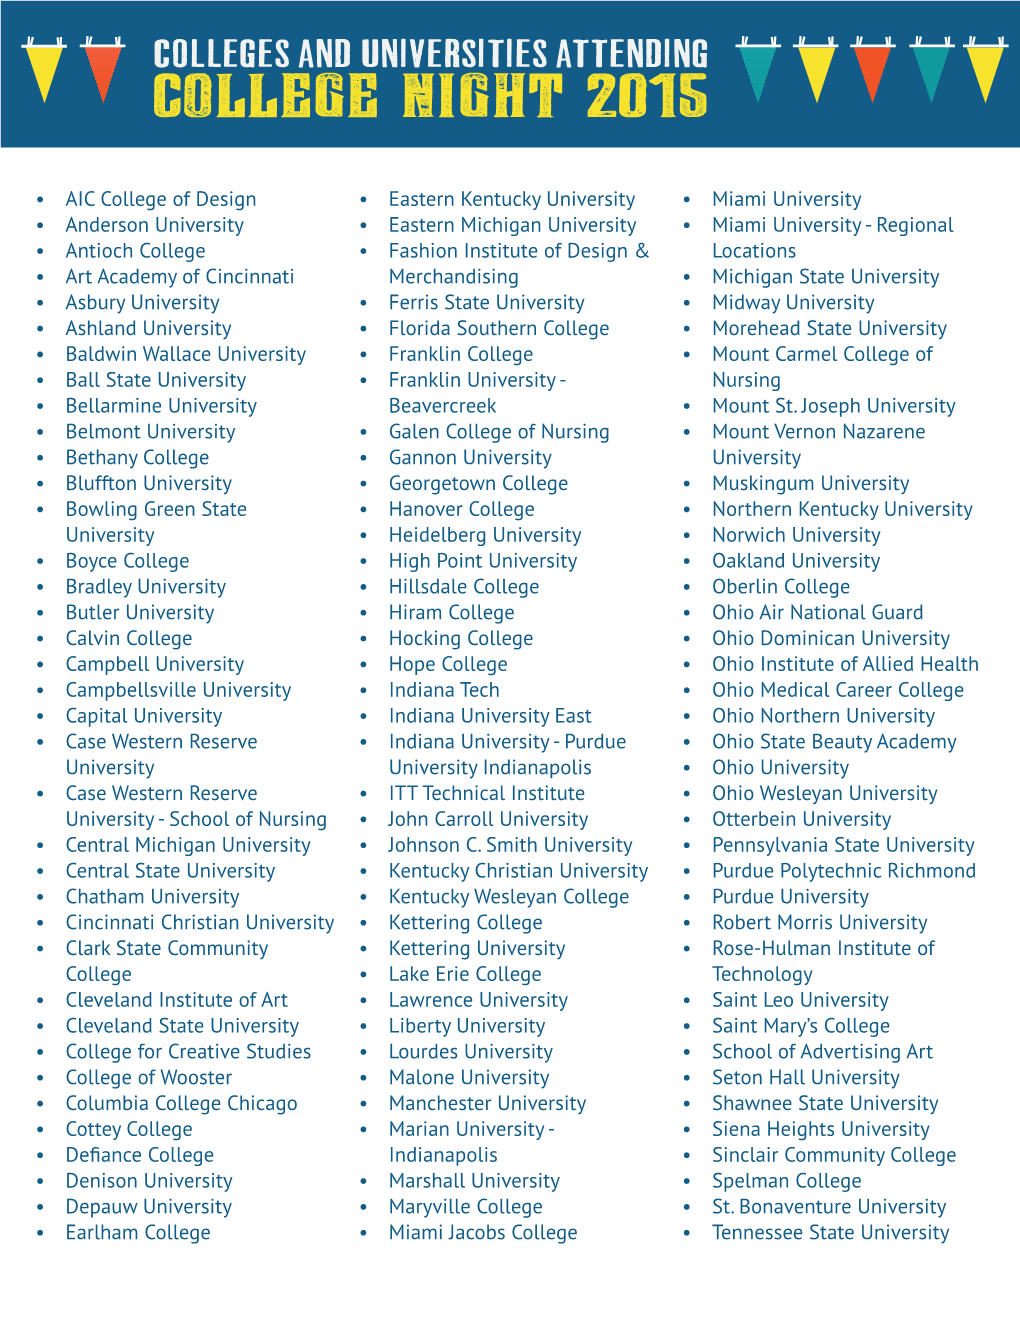 Colleges and Universities Attending College Night 2015